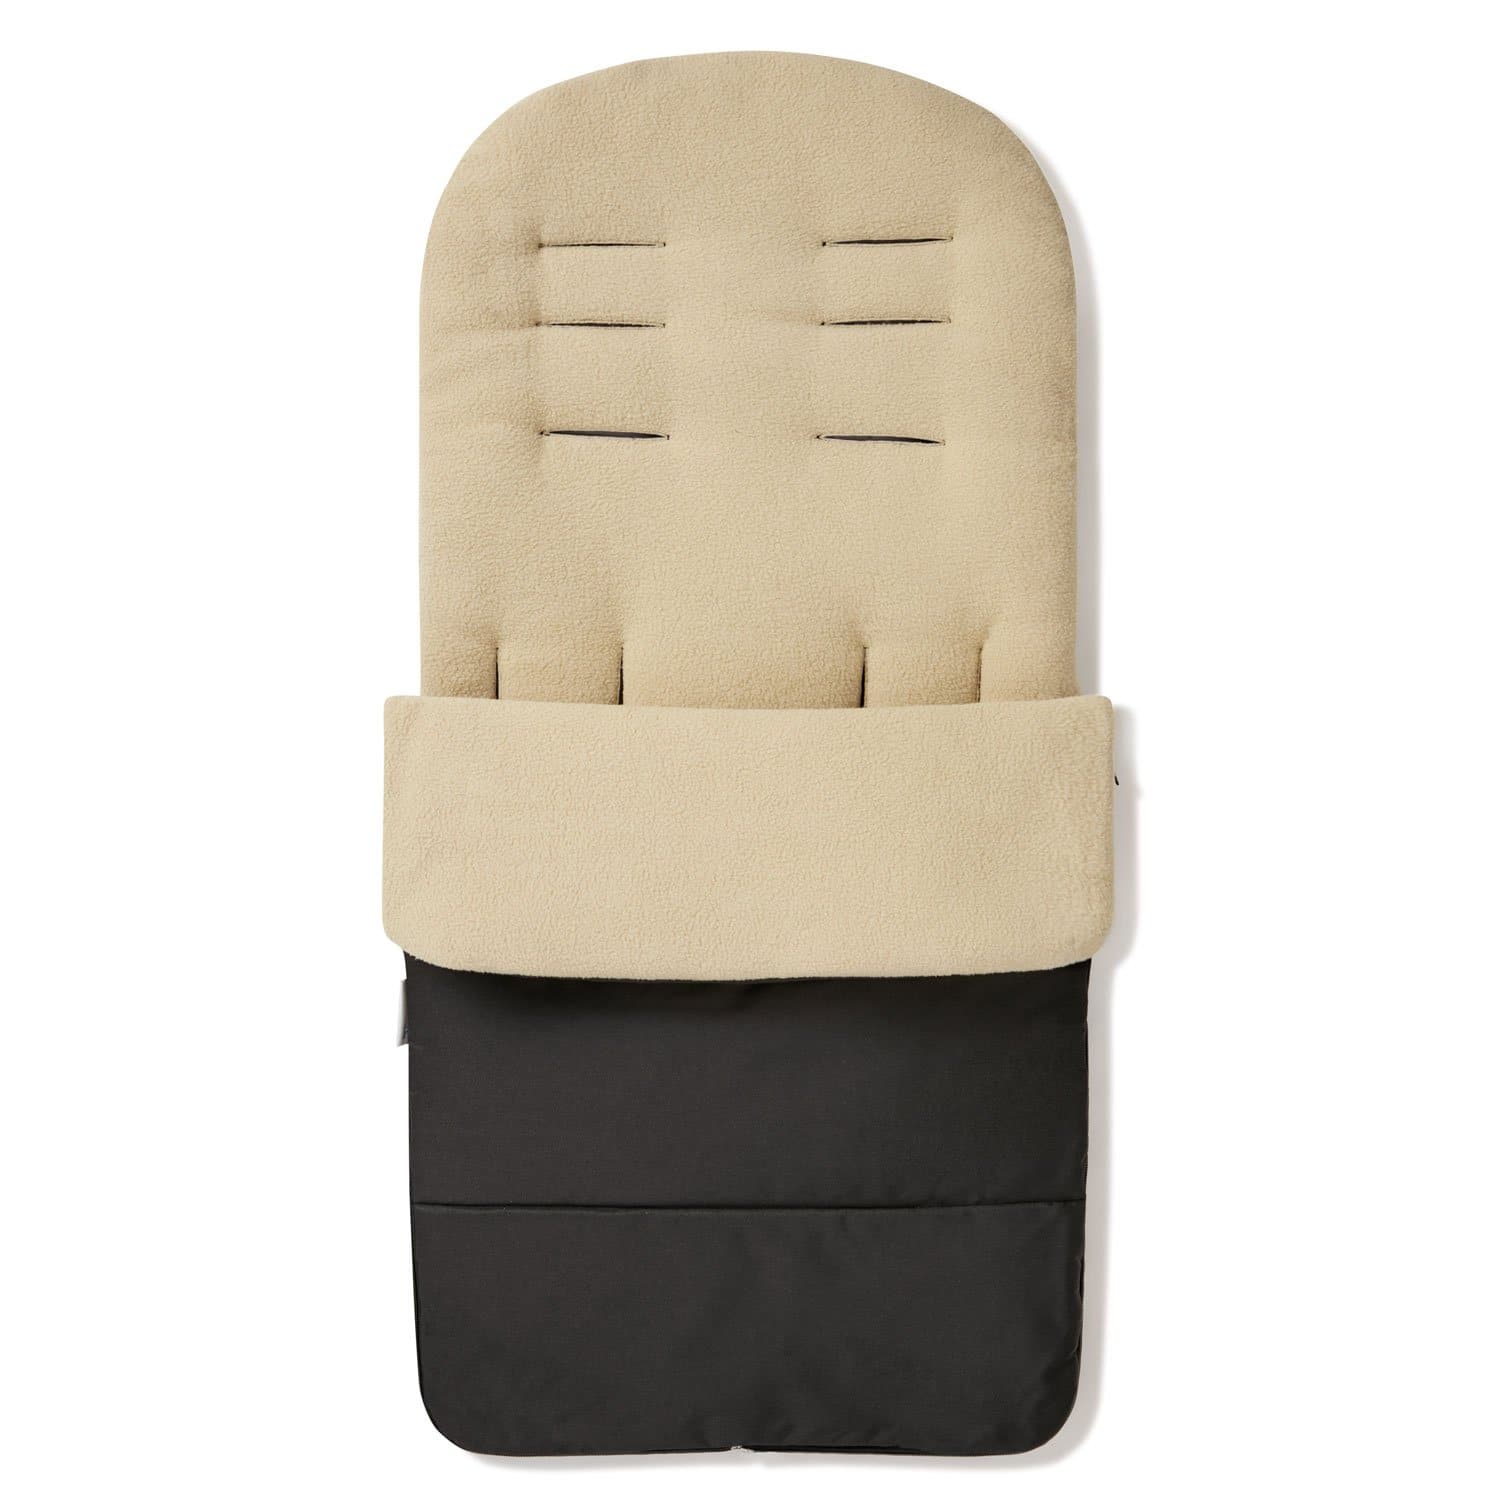 Premium Footmuff / Cosy Toes Compatible with Mamas & Papas - Desert Sand / Fits All Models | For Your Little One